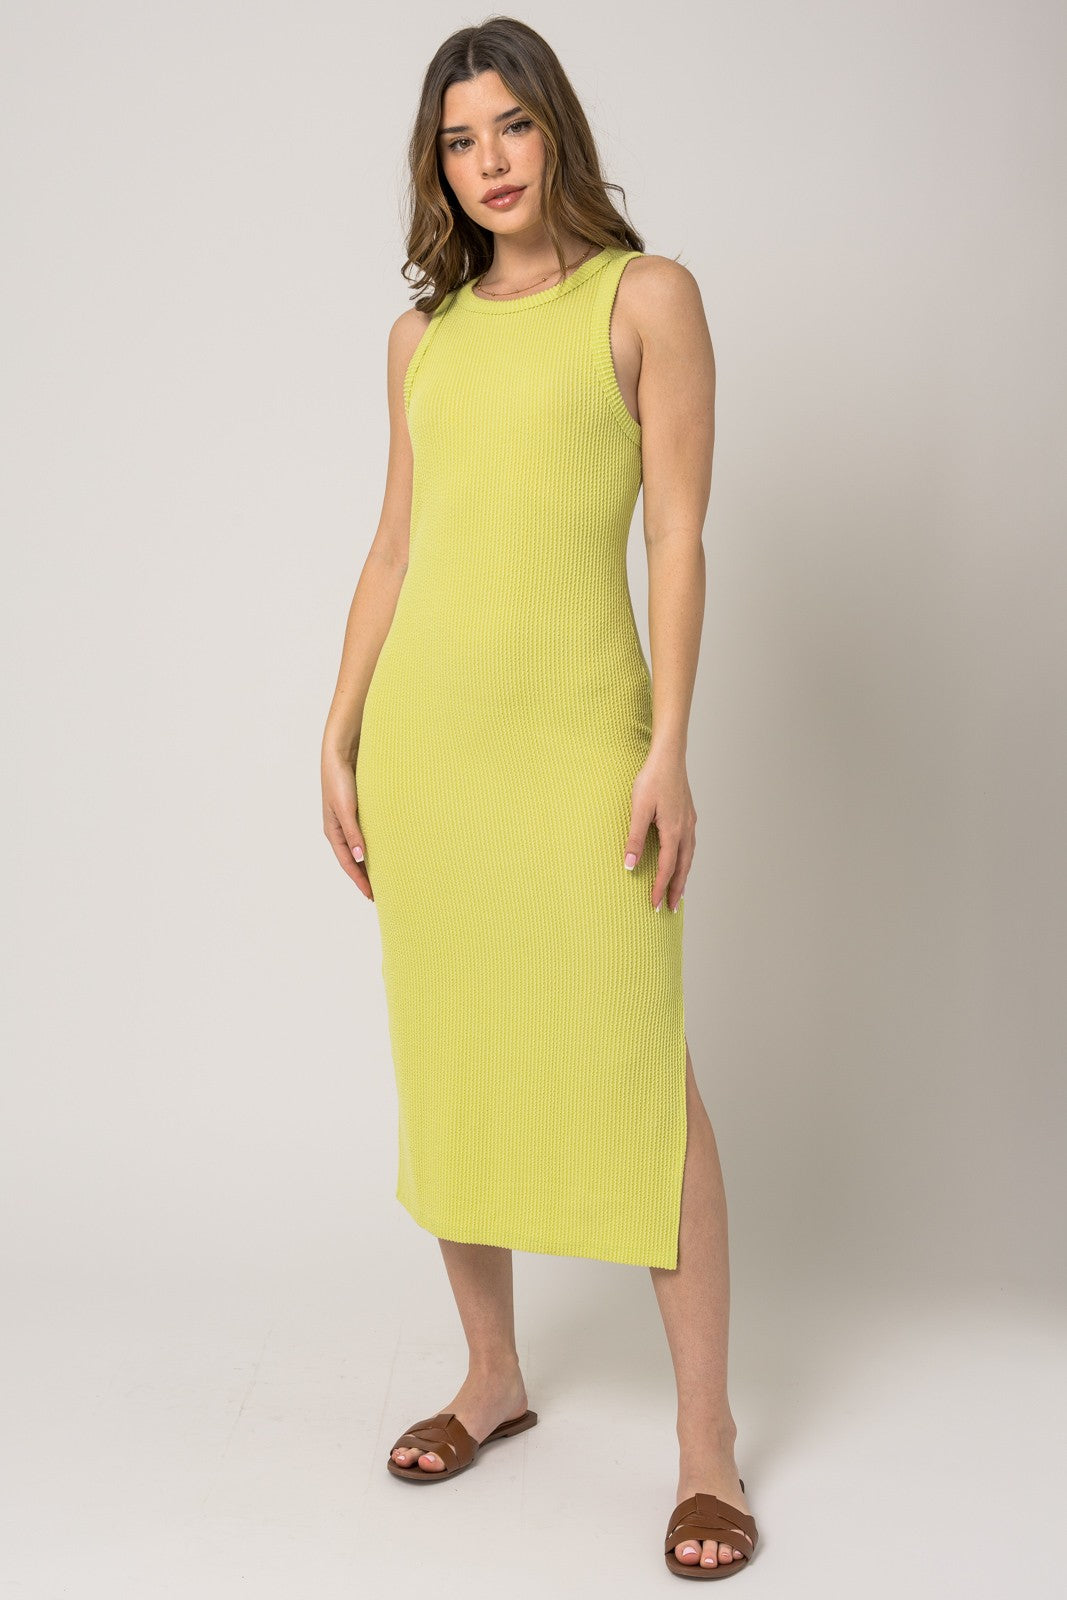 EVELINE FITTED DRESS